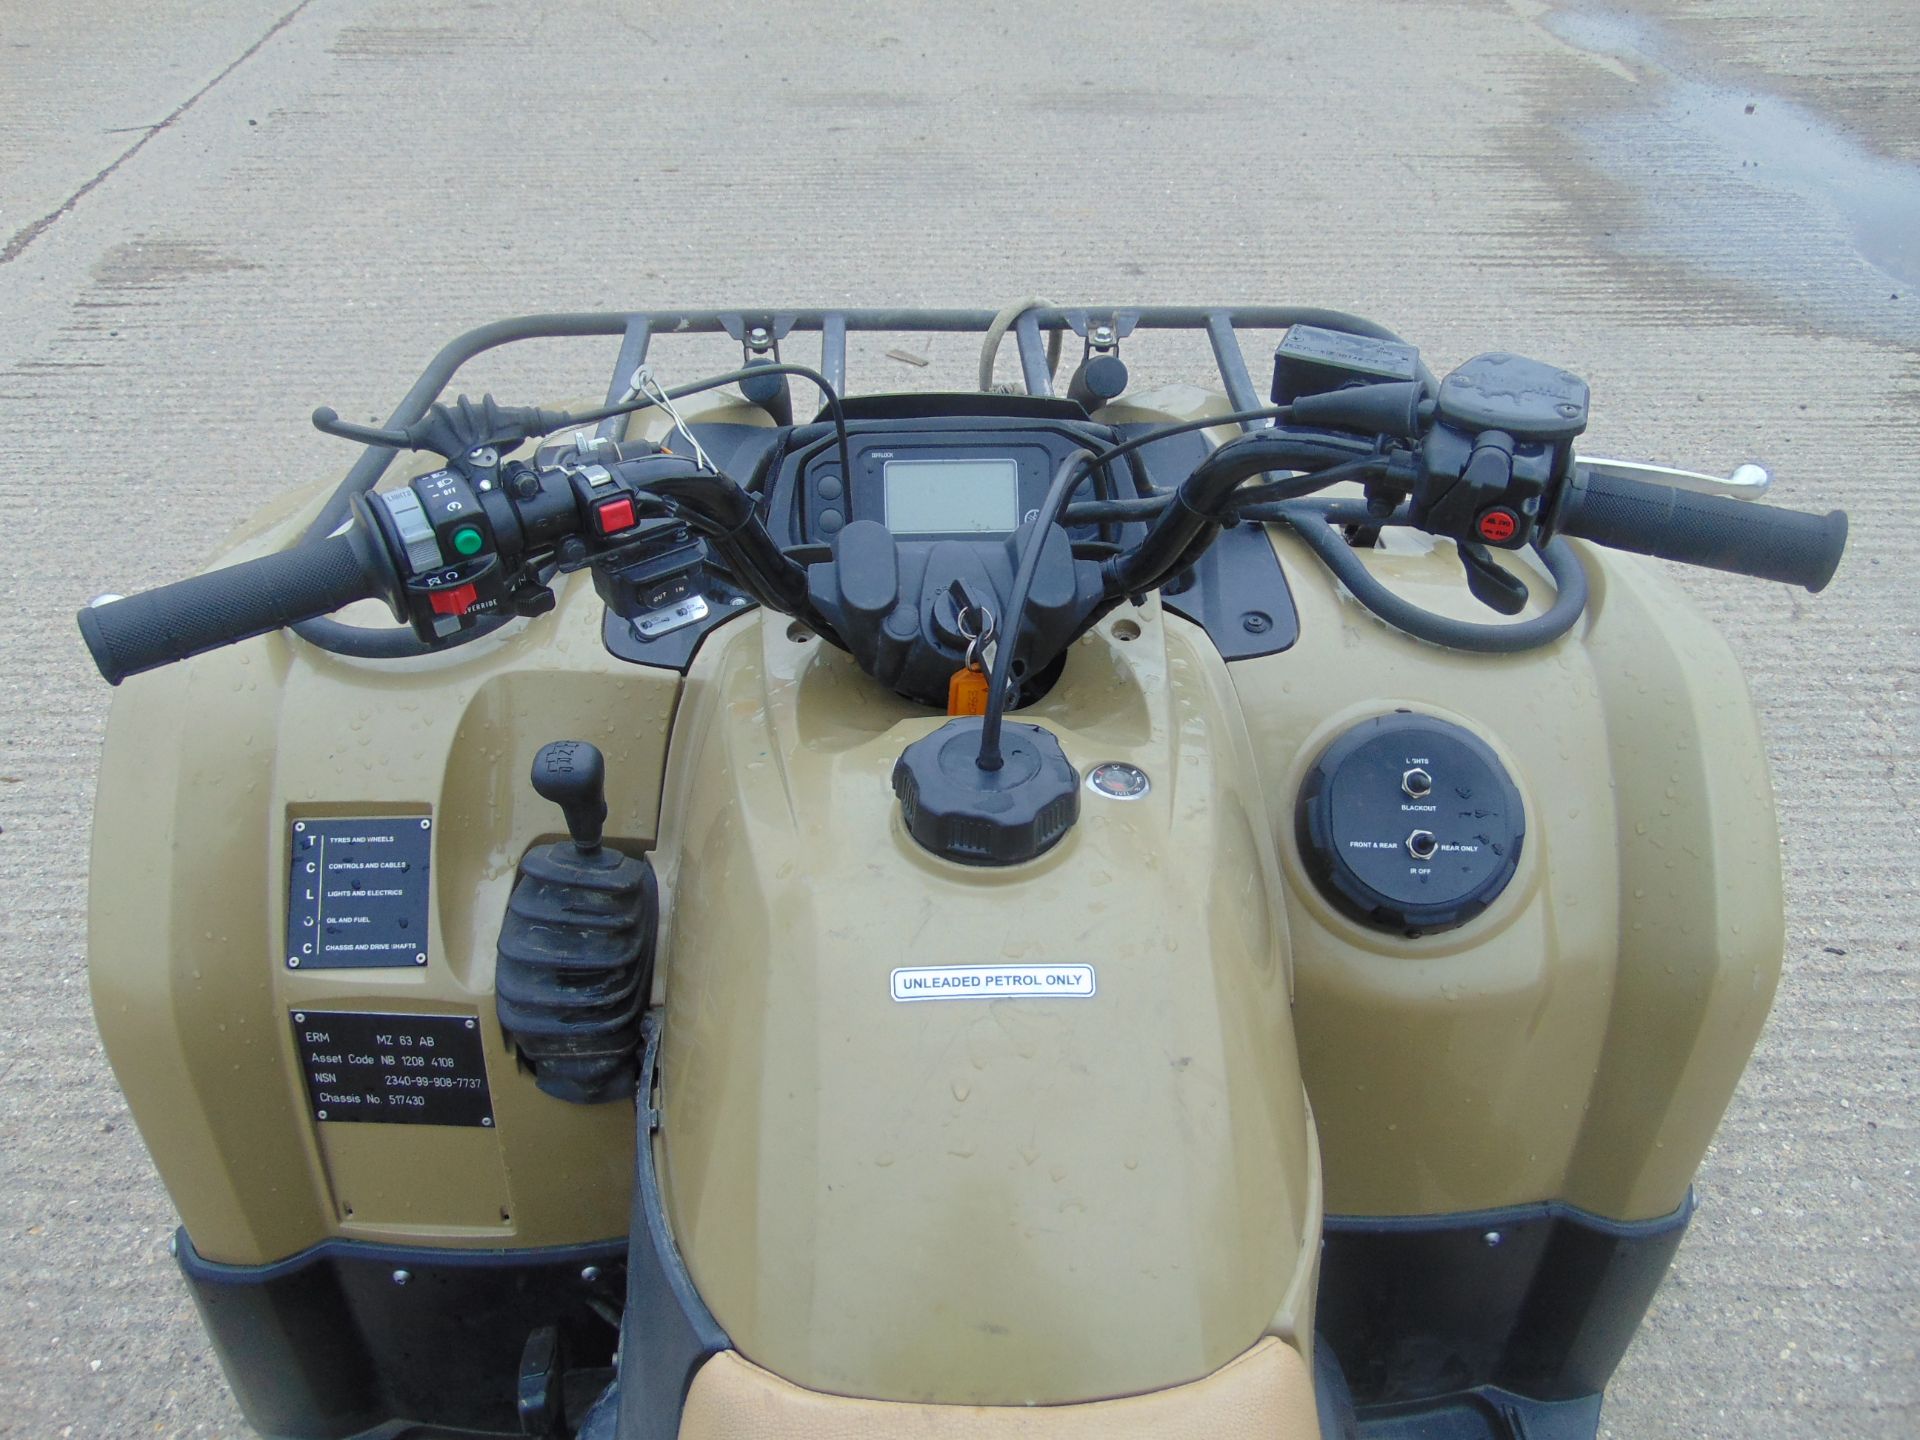 Military Specification Yamaha Grizzly 450 4 x 4 ATV Quad Bike - Image 9 of 19